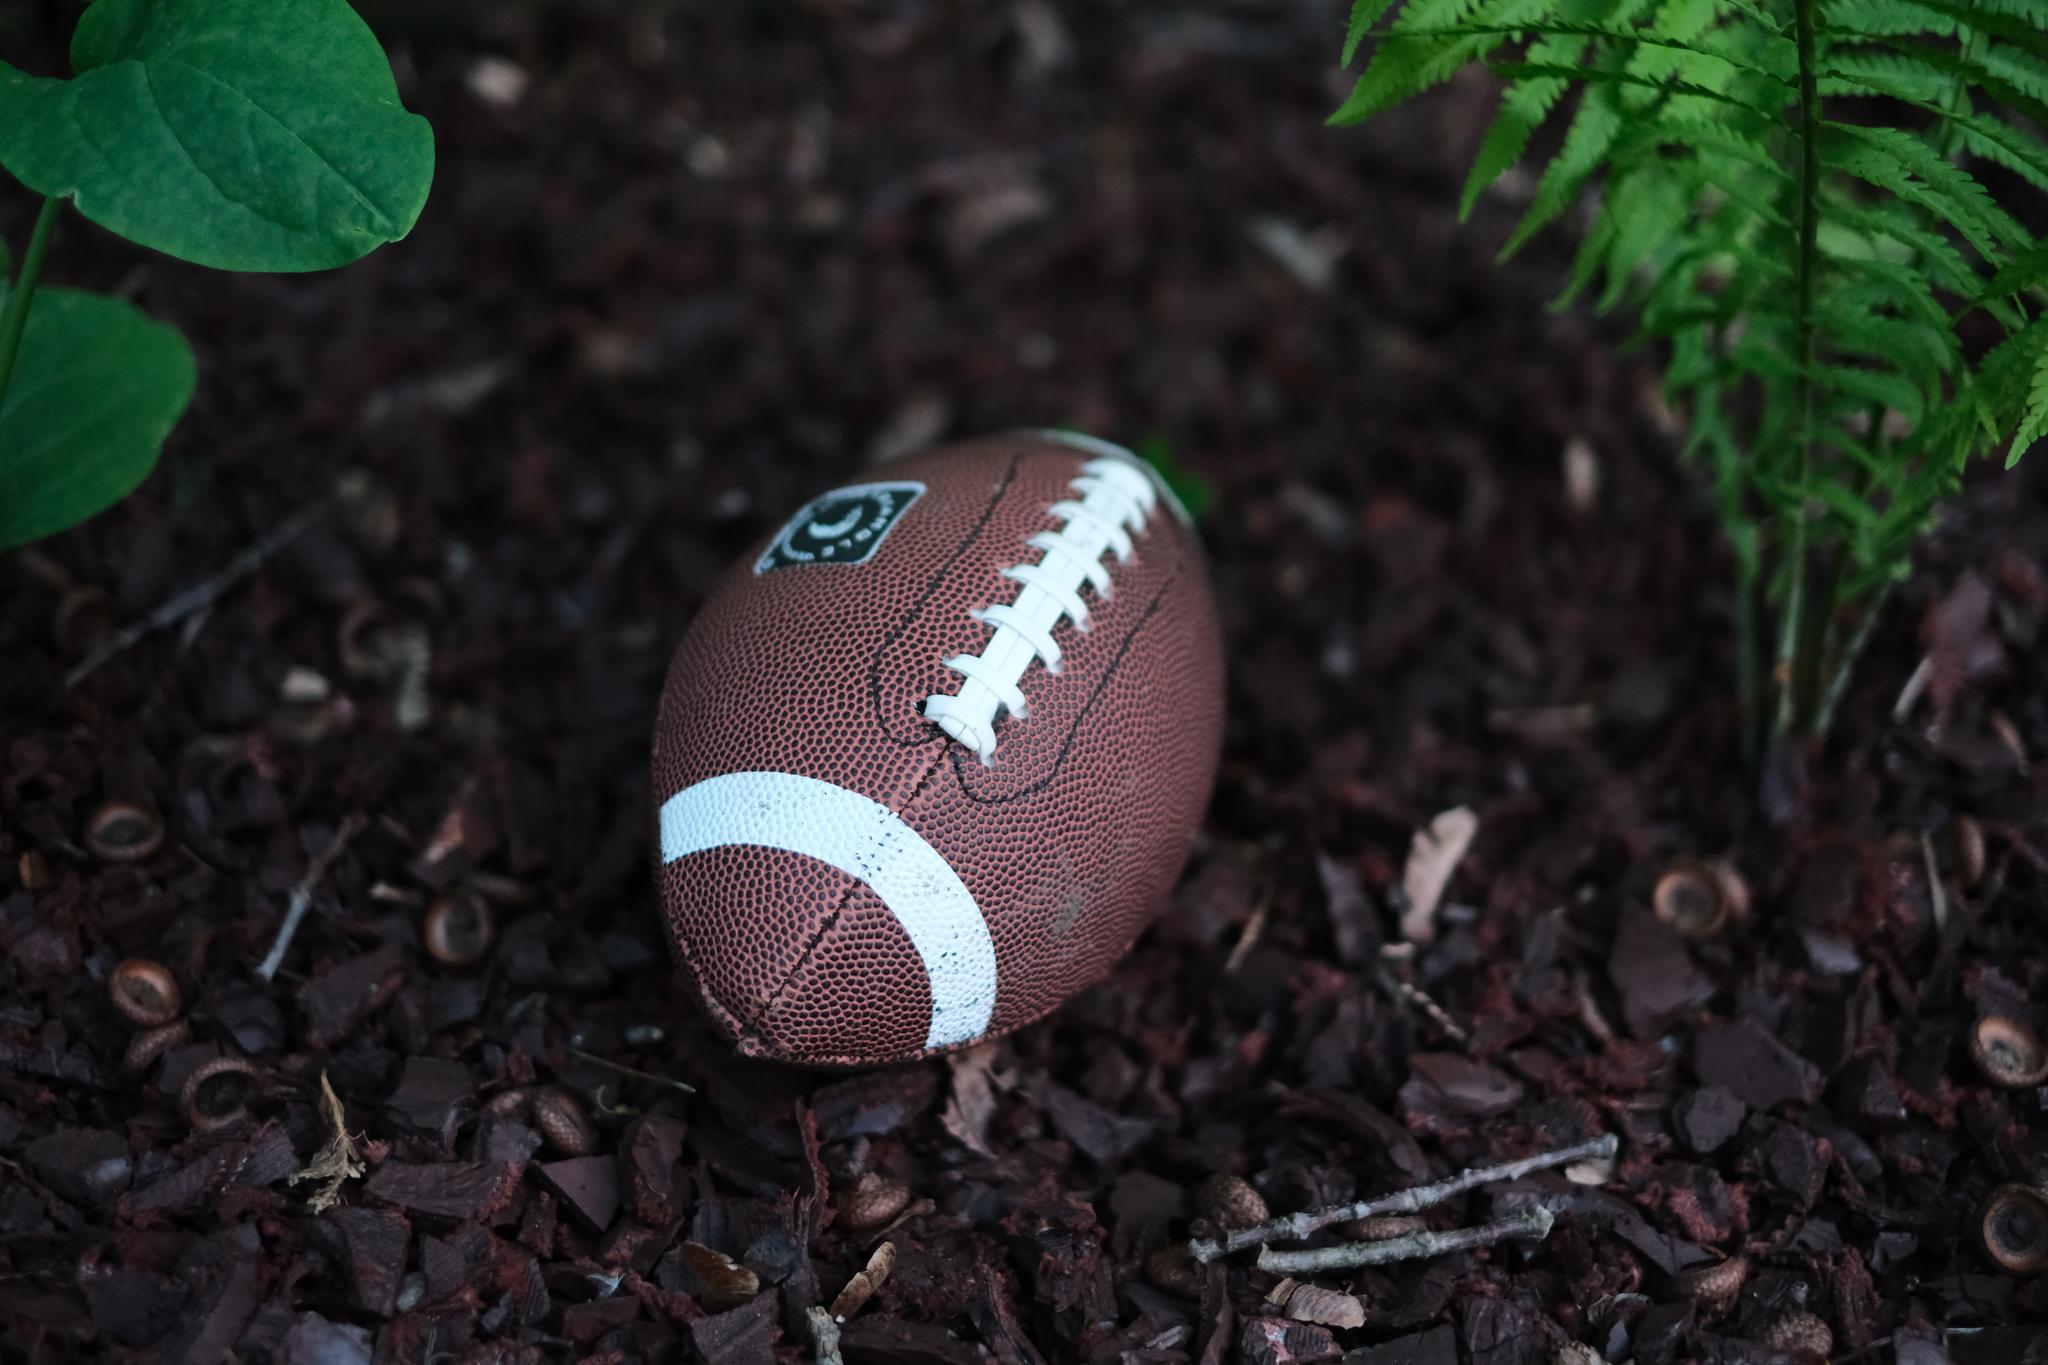 A small football rests on dark soil surrounded by green plants